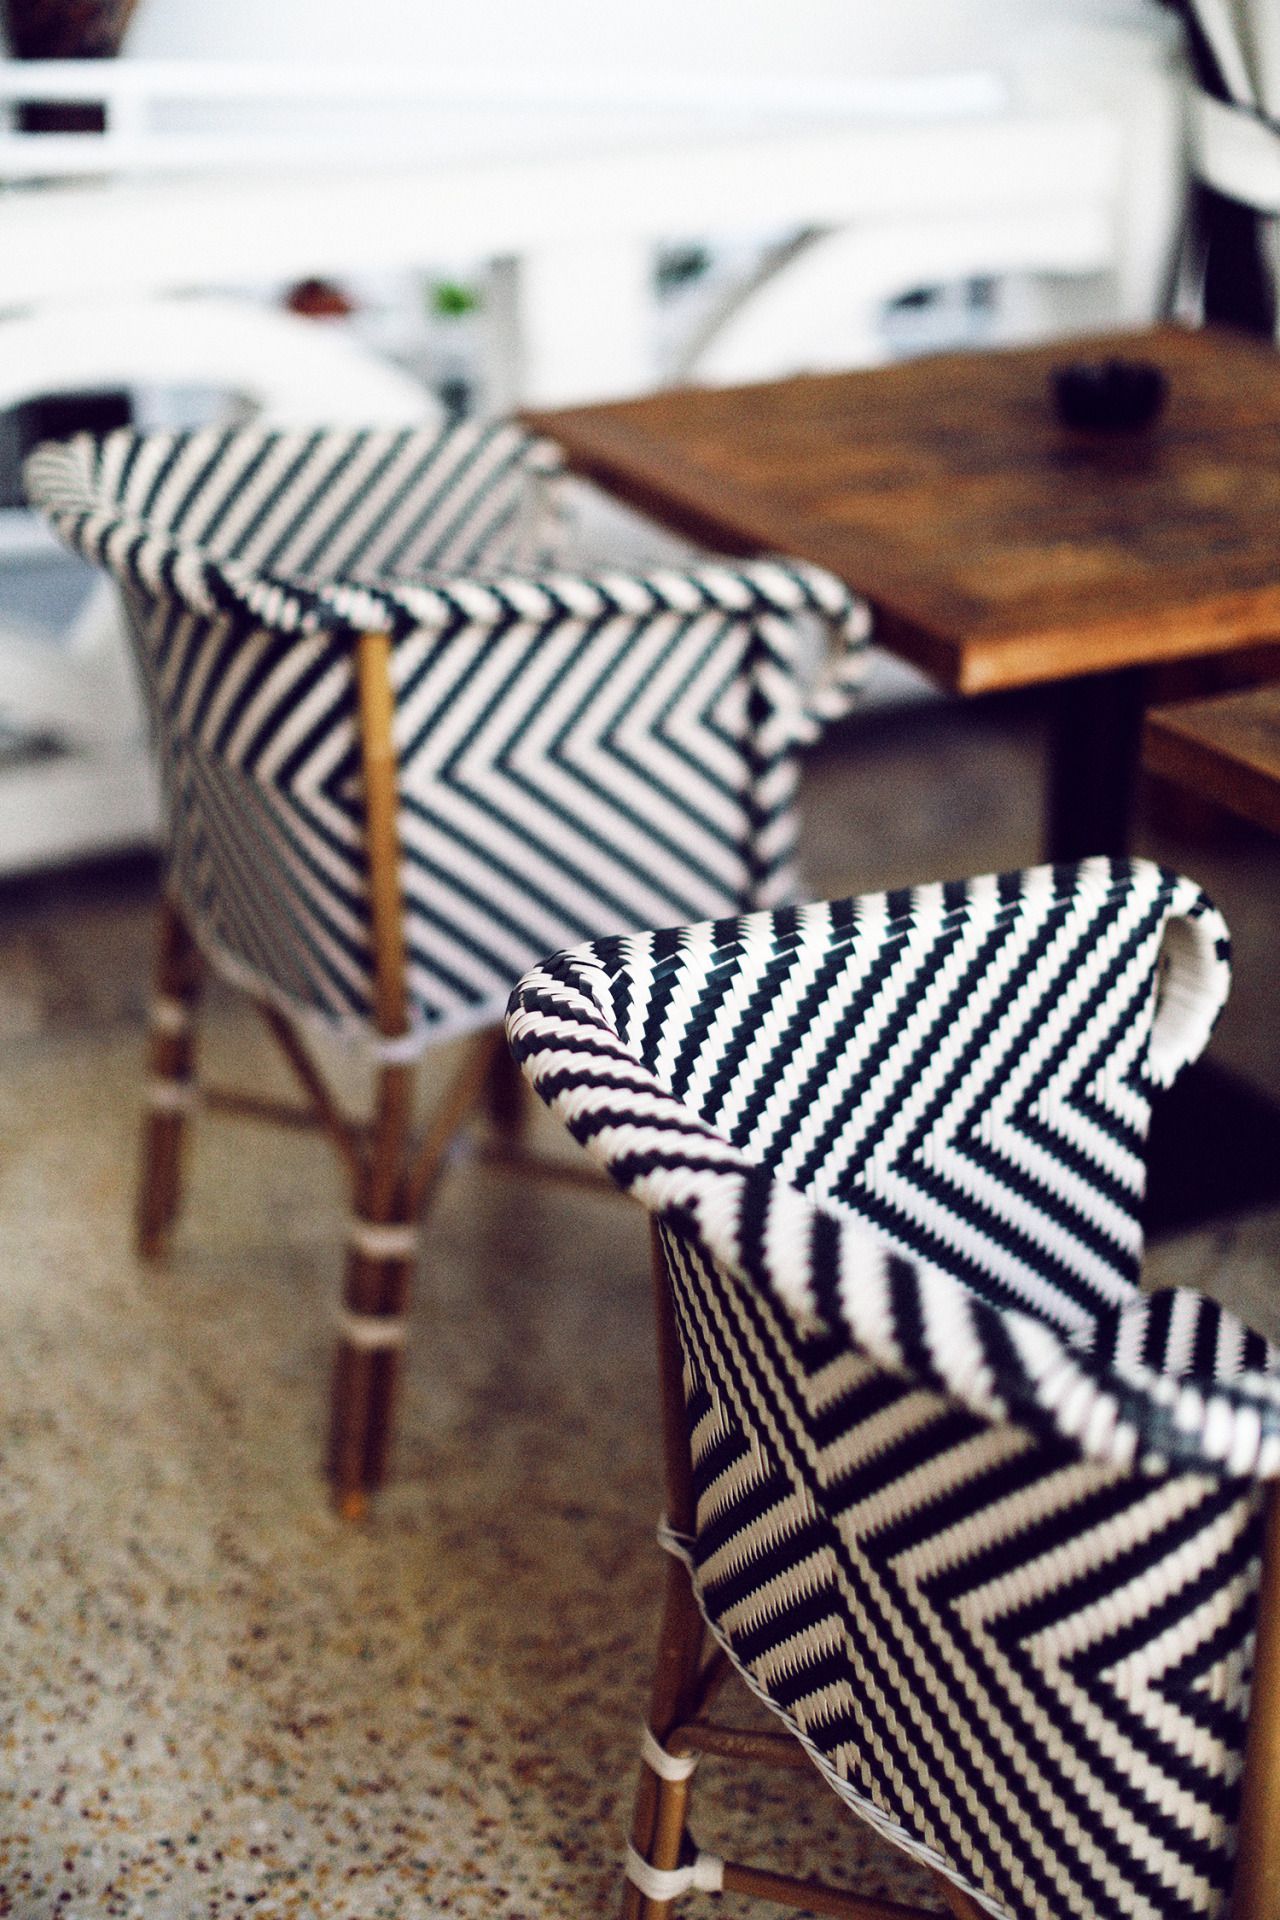 Black and white striped chairs #earnyourstripes